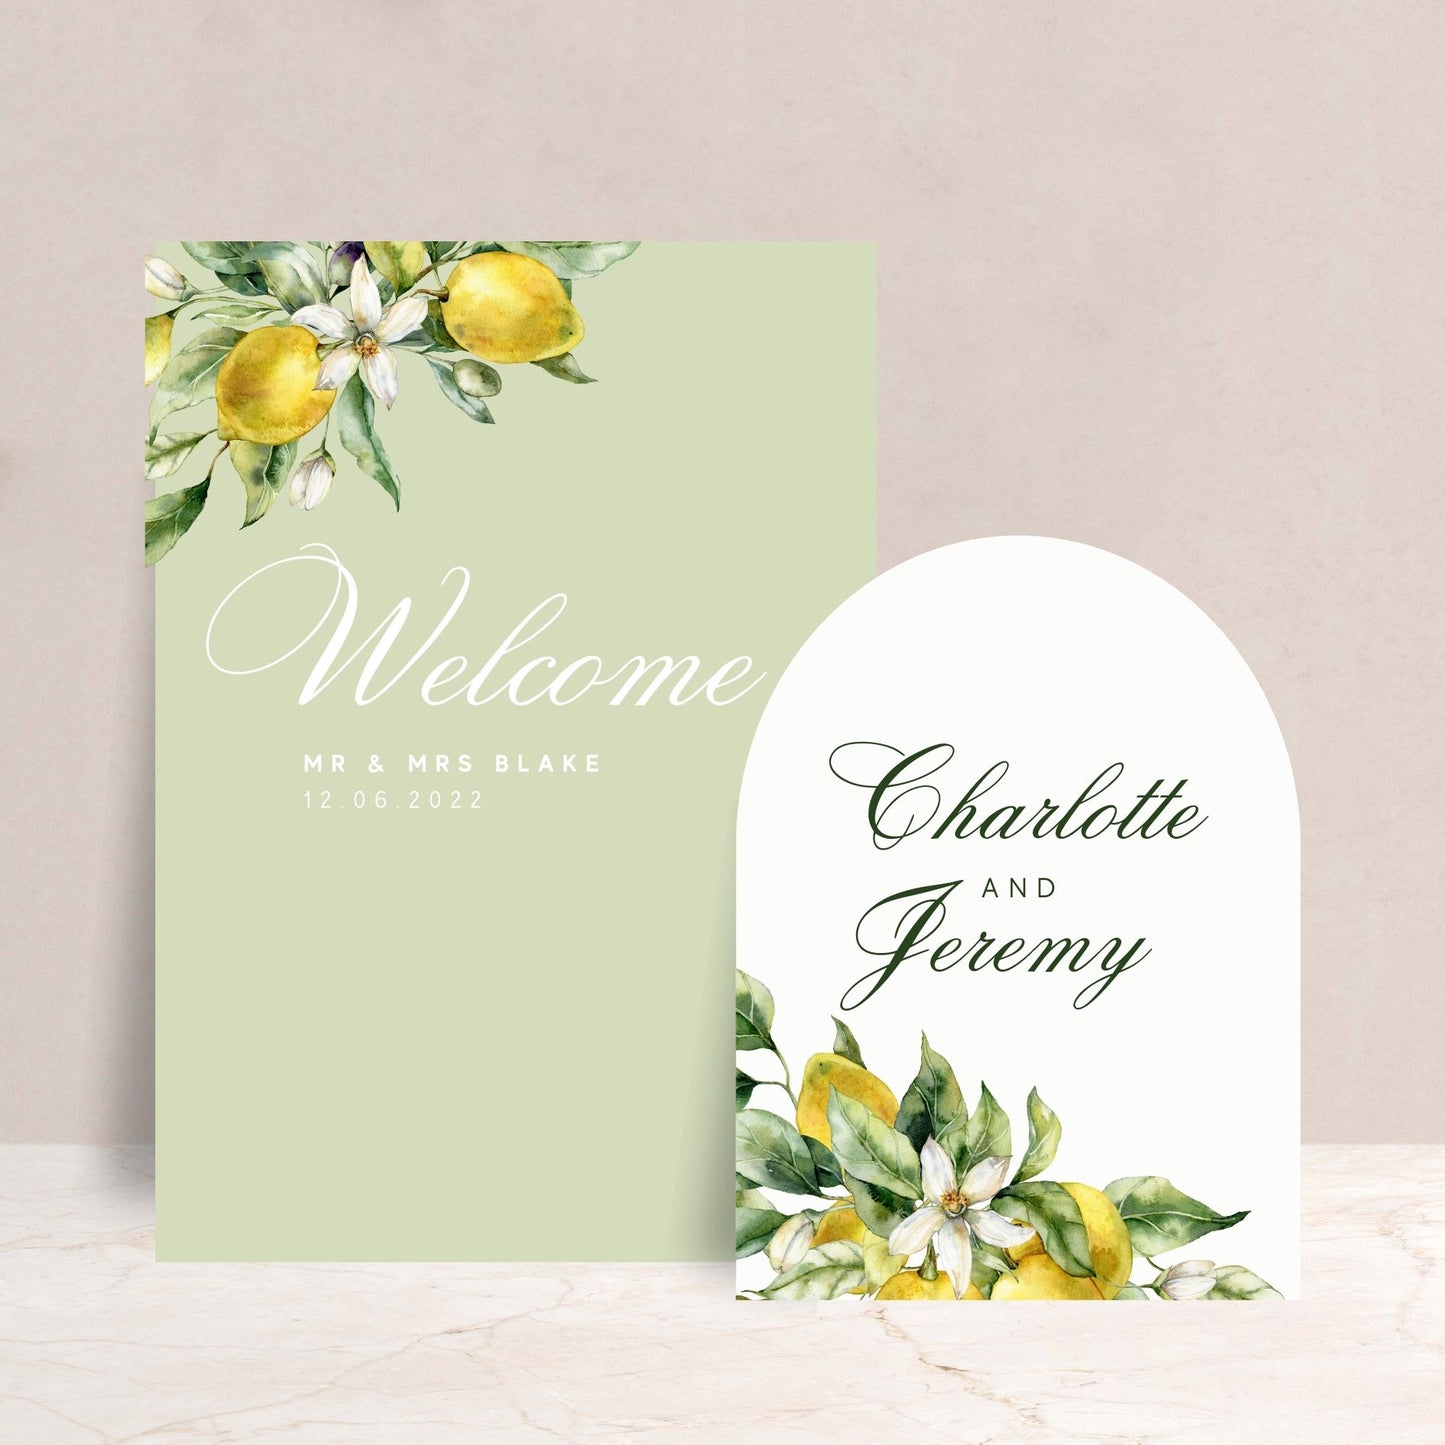 CHARLOTTE Wedding Welcome Sign Set of 2 - Wedding Ceremony Stationery available at The Ivy Collection | Luxury Wedding Stationery